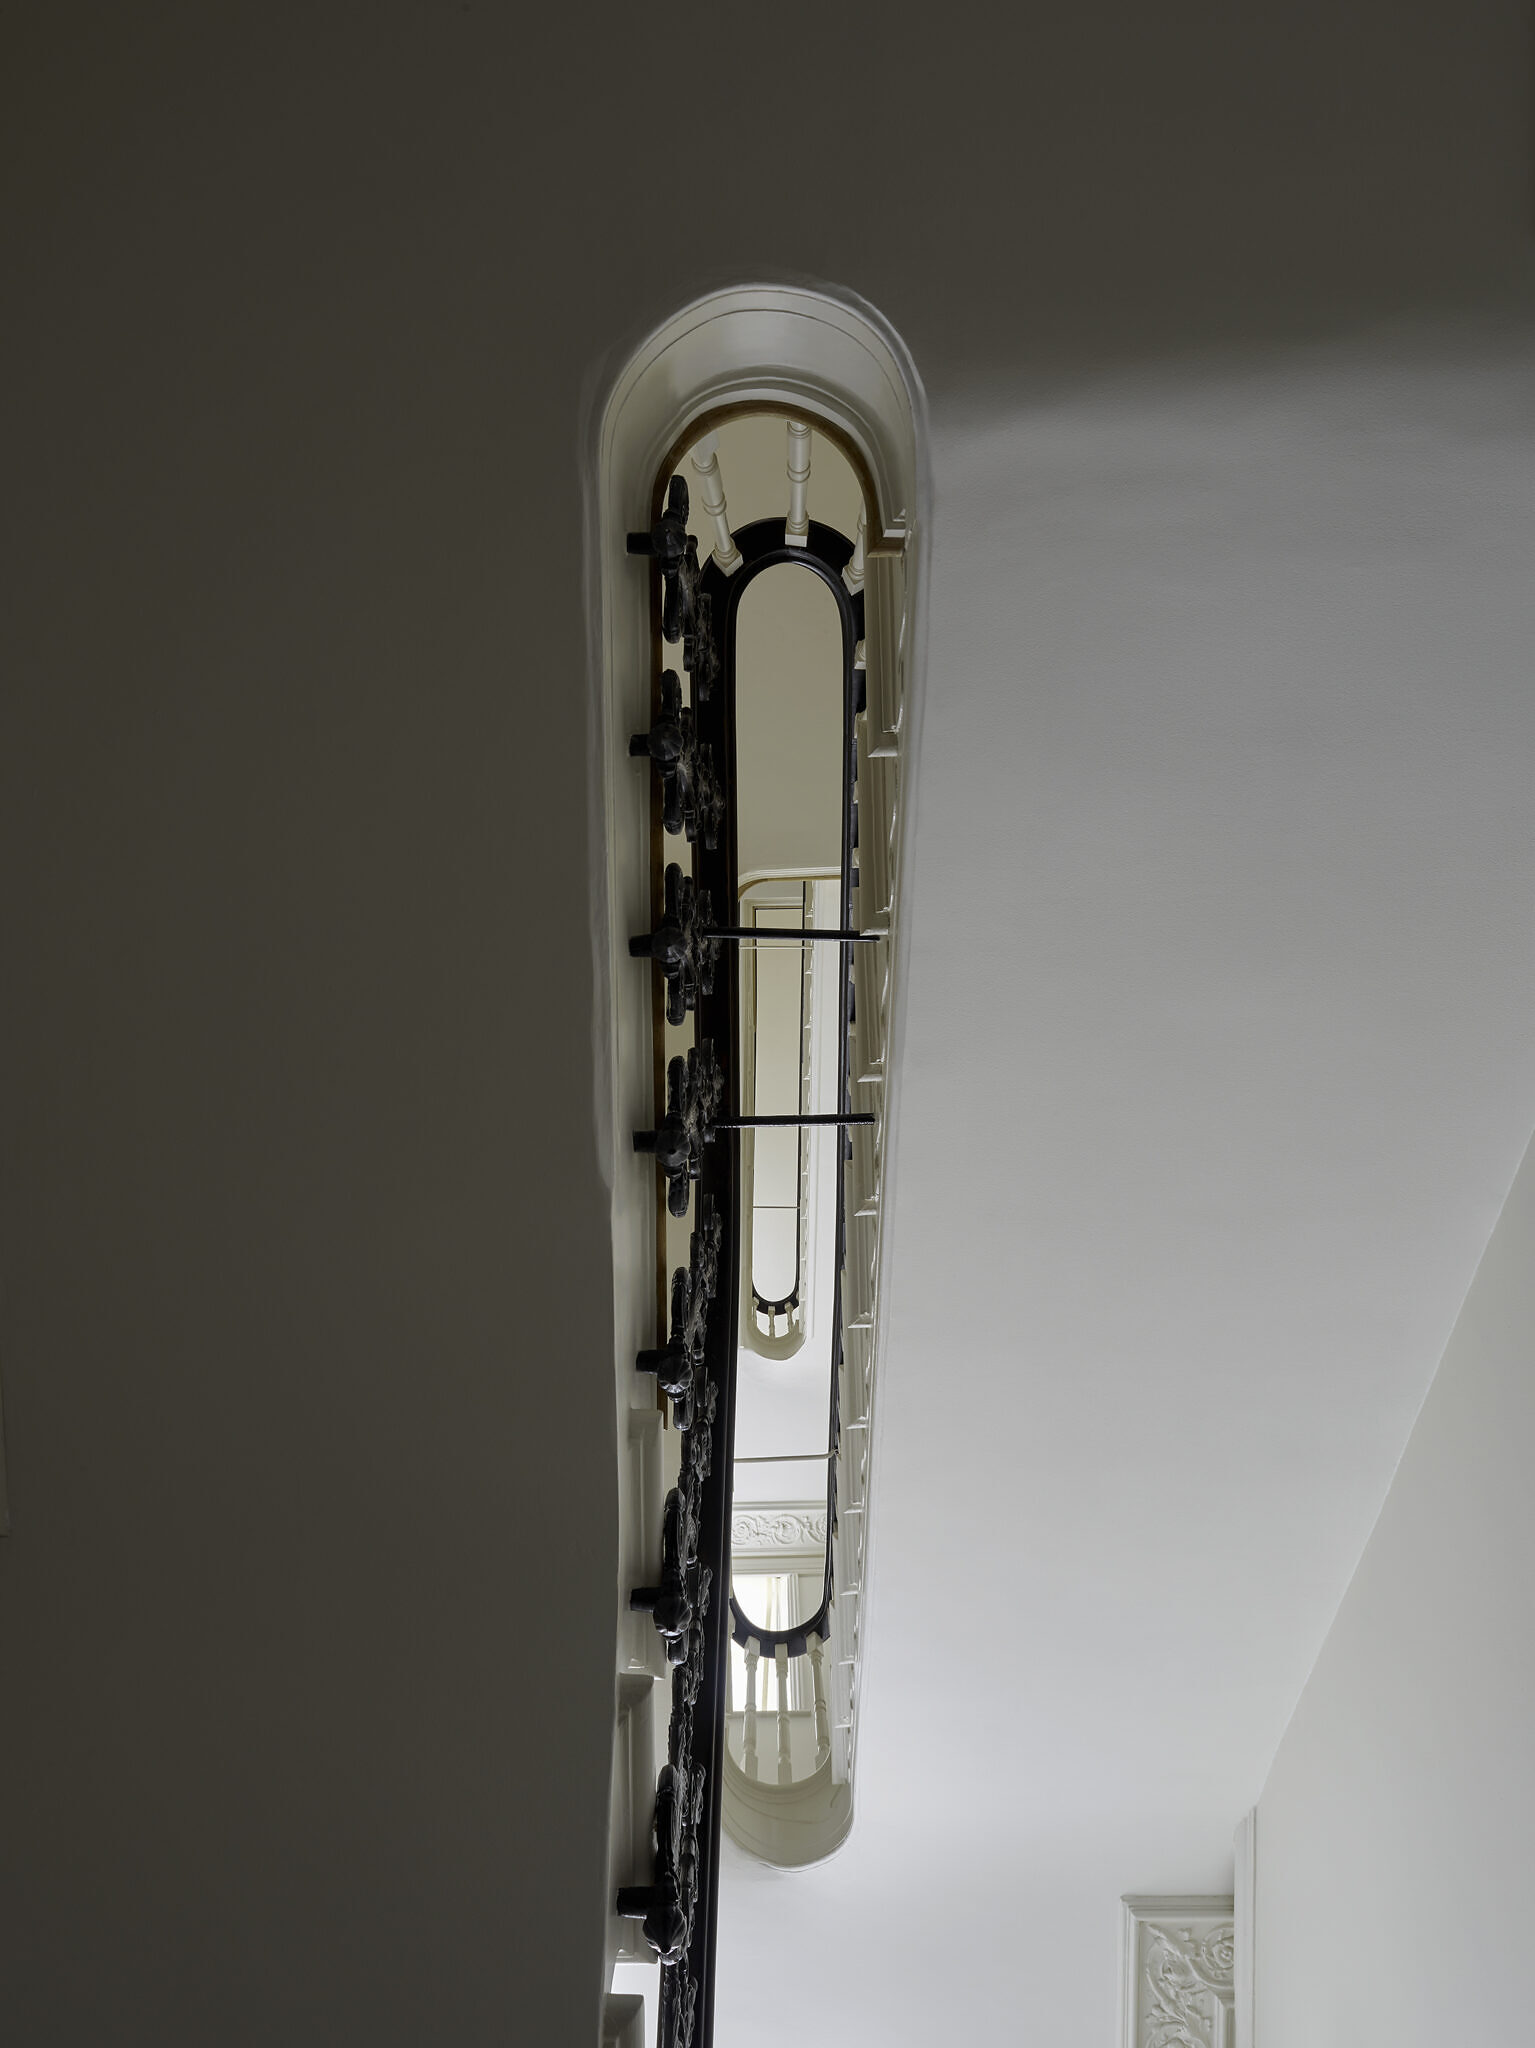 Closeup shot of the multiple floors, as seen through the curved staircase. The image is taken from below.